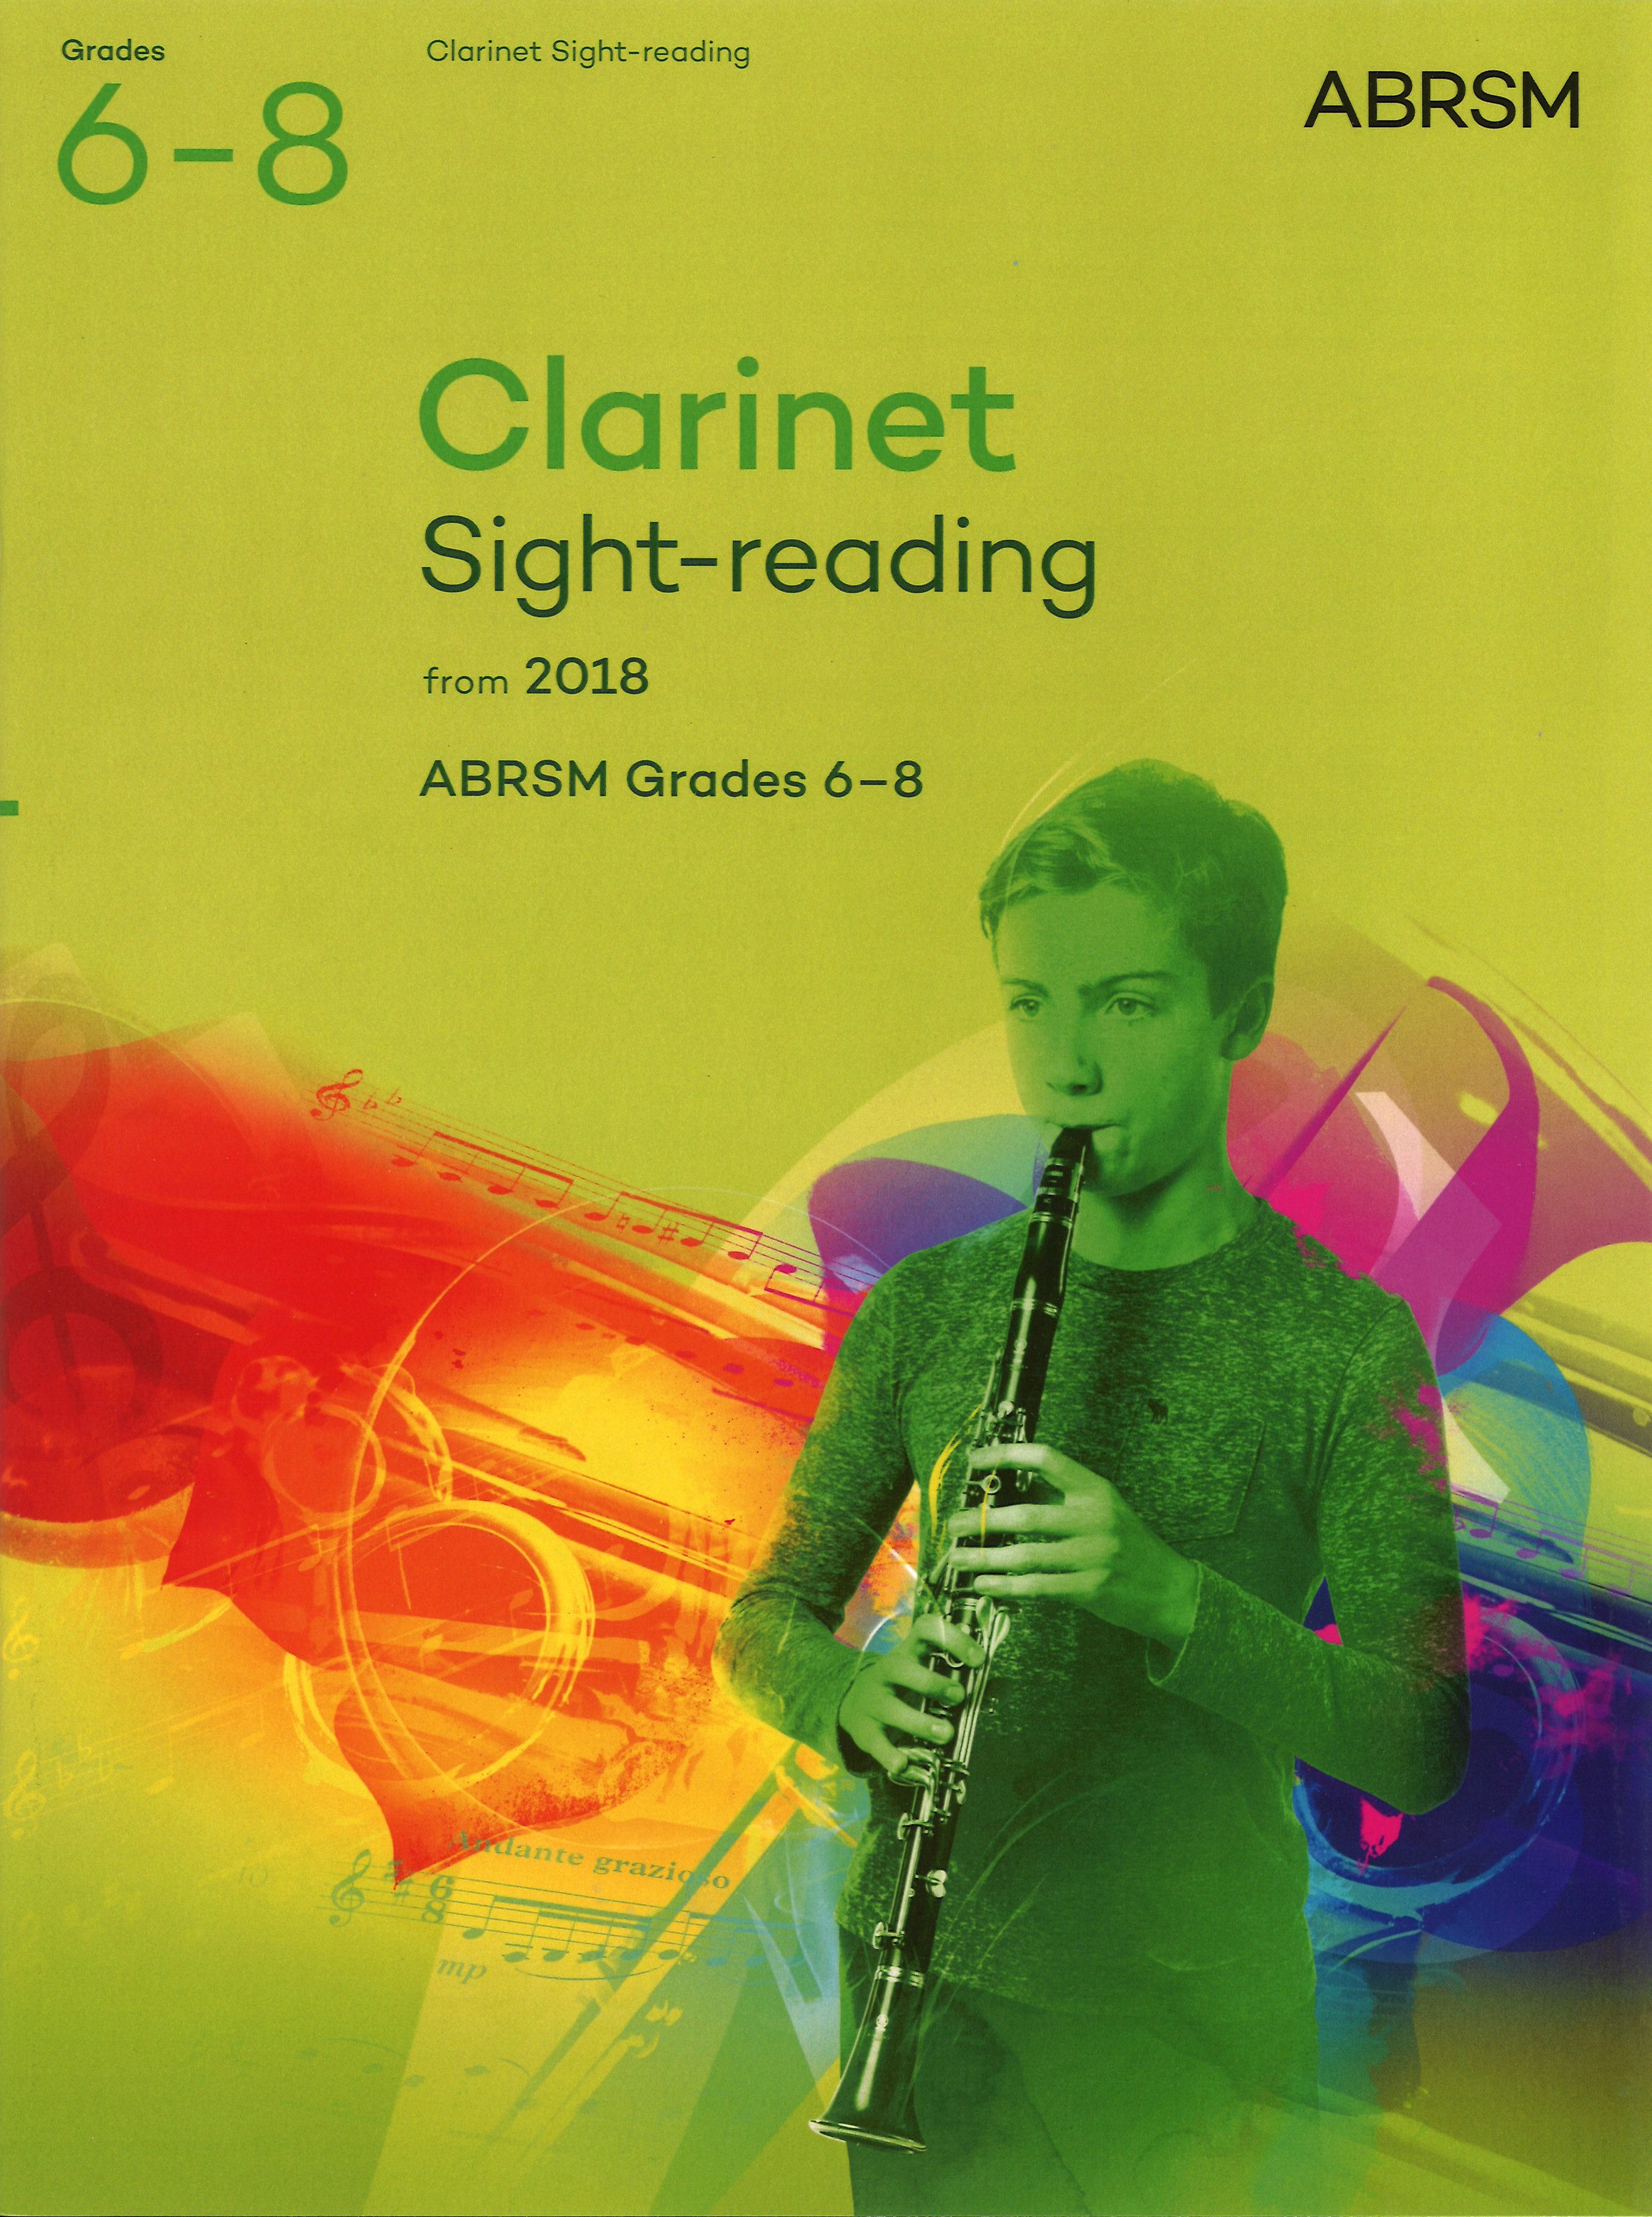 Clarinet Sight Reading Tests From 2018 Grades 6-8 Sheet Music Songbook